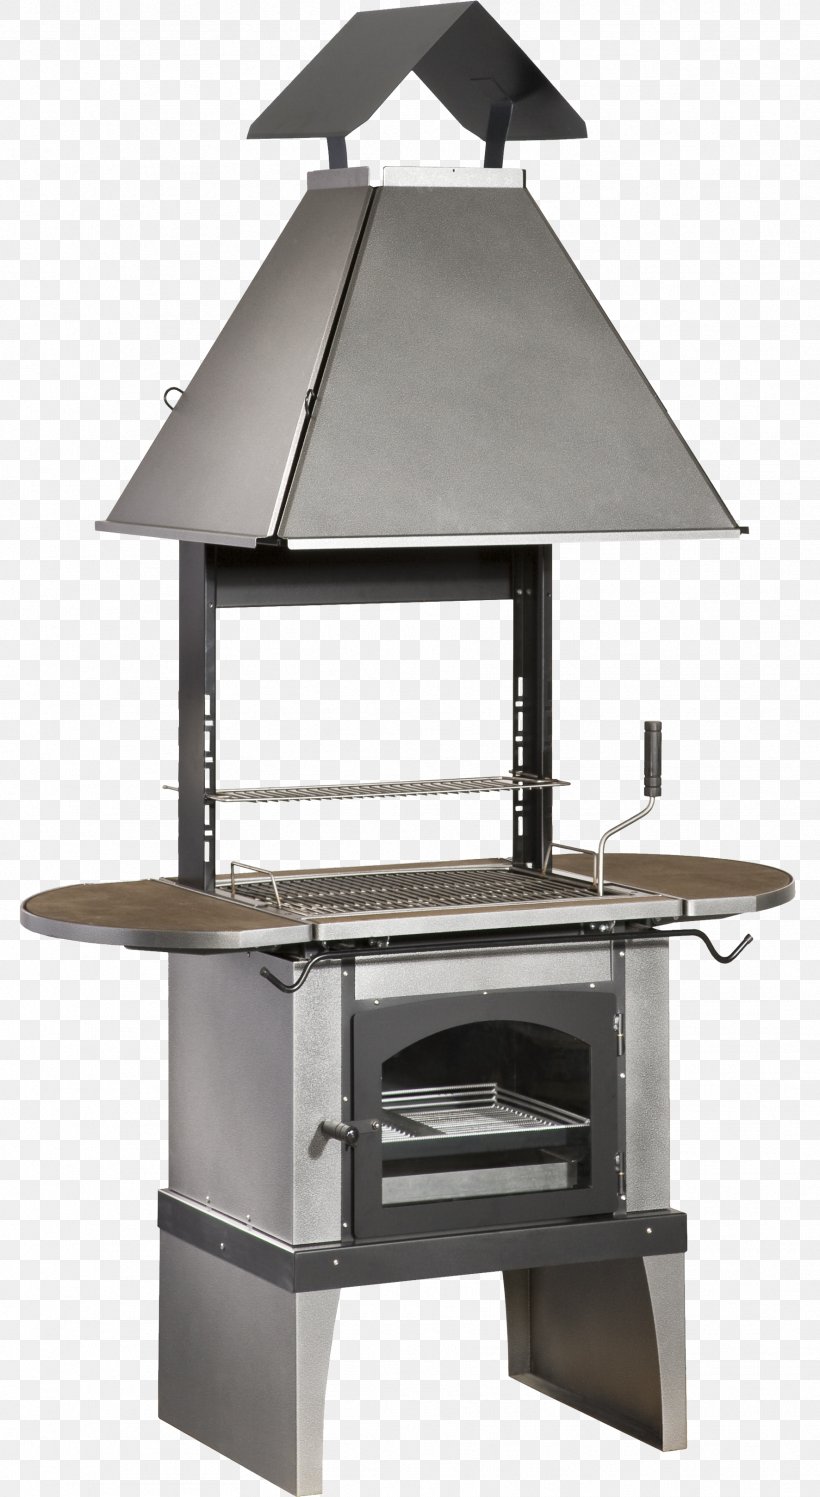 Barbecue Hearth Steel Finland Smoking, PNG, 1772x3236px, Barbecue, Finland, Finnish, Fireplace, Grinding Download Free